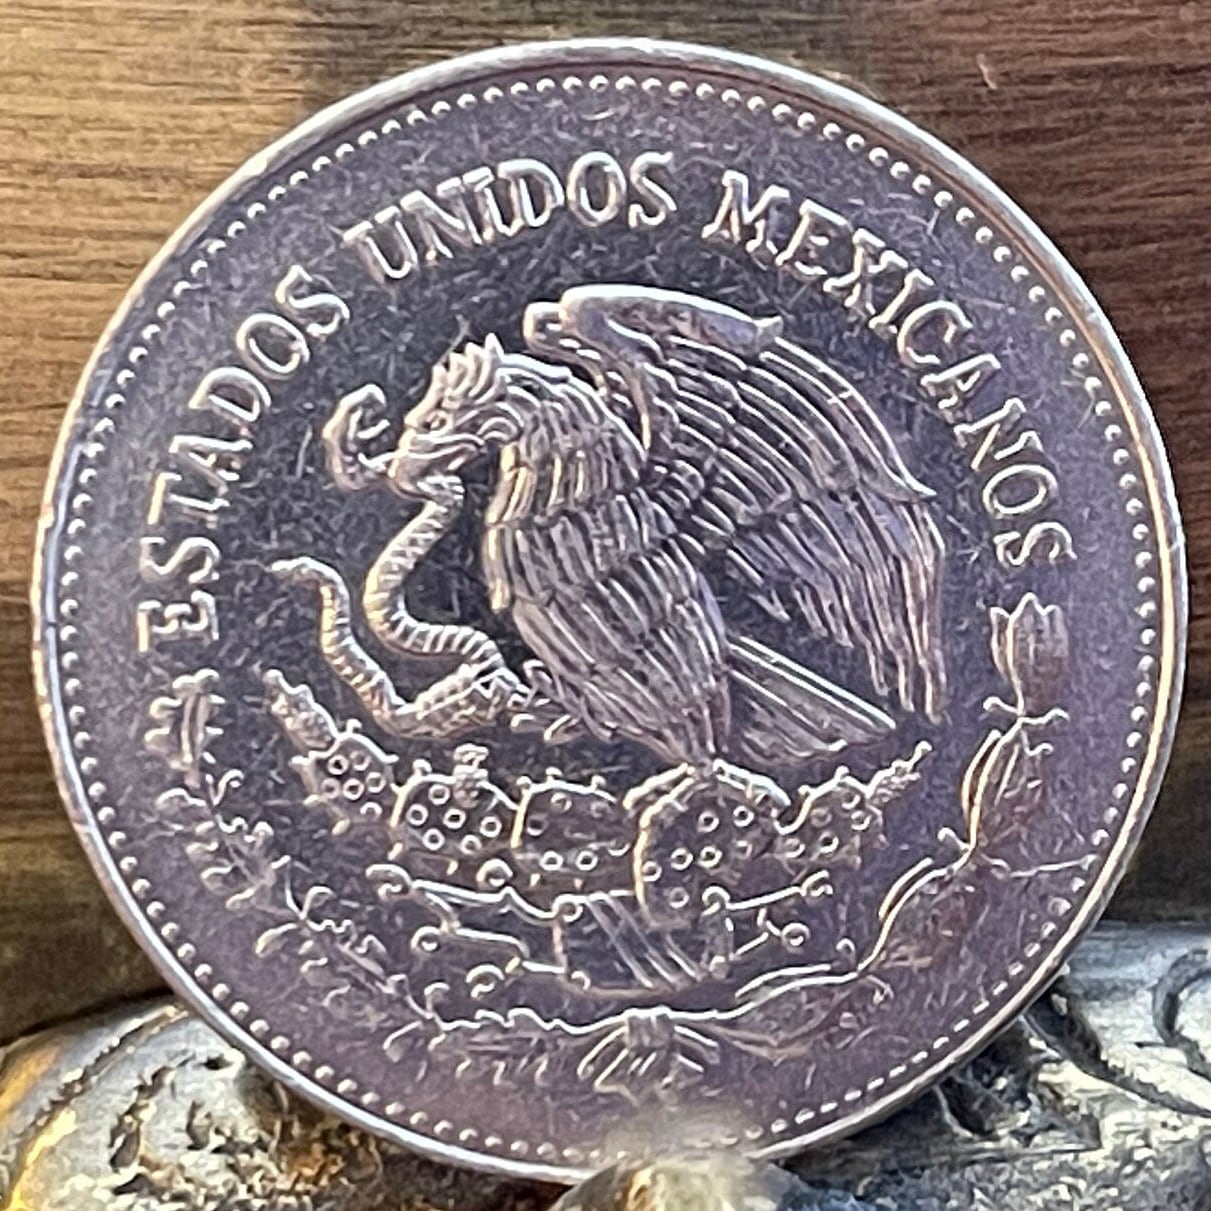 Angel and Heroes of Independence 200 Pesos Mexico Authentic Coin Money for Jewelry (Mexican Revolution) (1985) (Independence Monument)